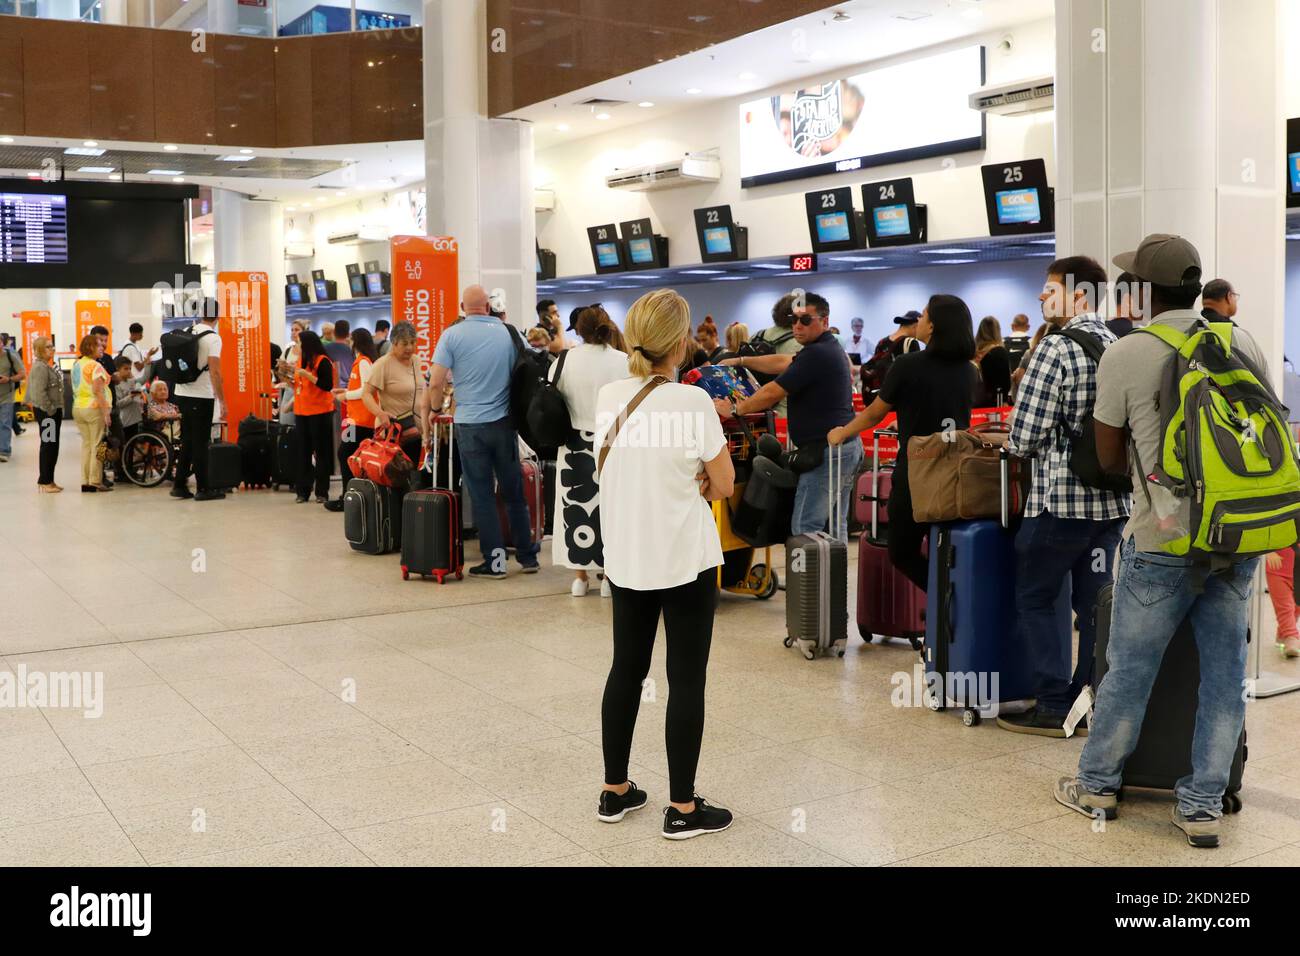 Santos Dumont Airport passengers in line at the boarding counters. Travellers at airport lobby, baggage drop area Stock Photo